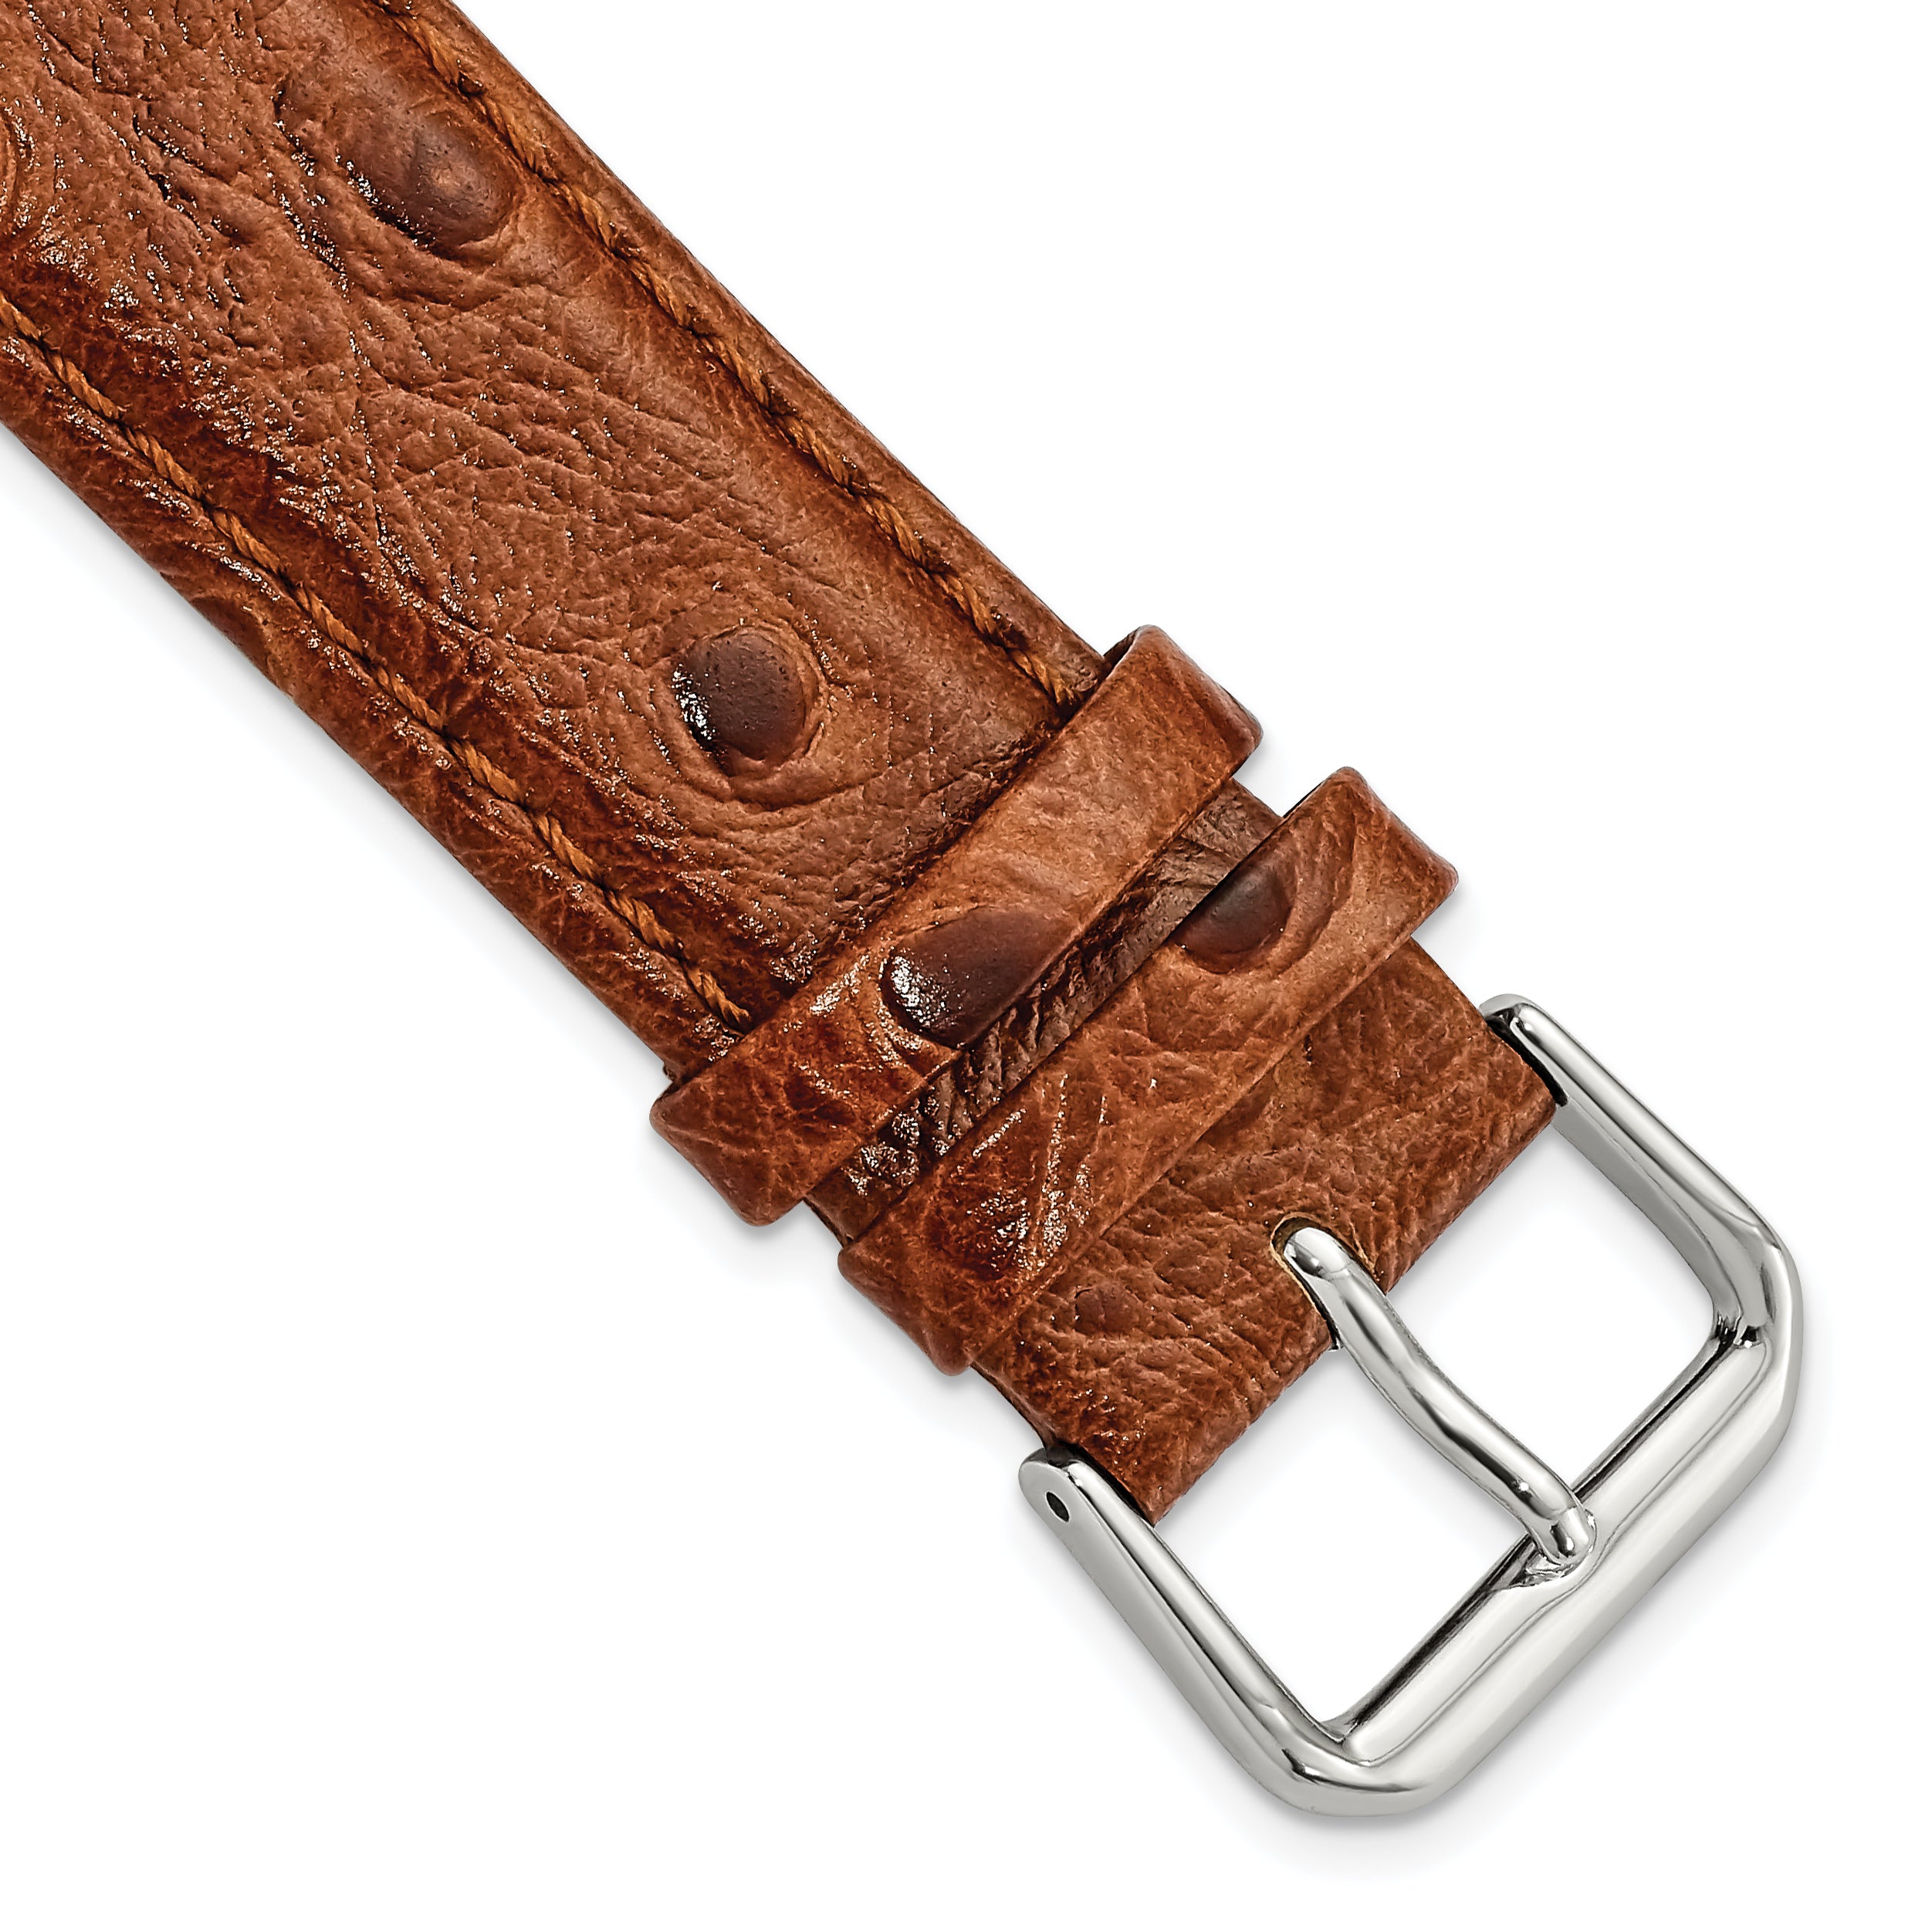 DeBeer 20mm Havana Ostrich Grain Leather with Silver-tone Buckle 7.5 inch Watch Band